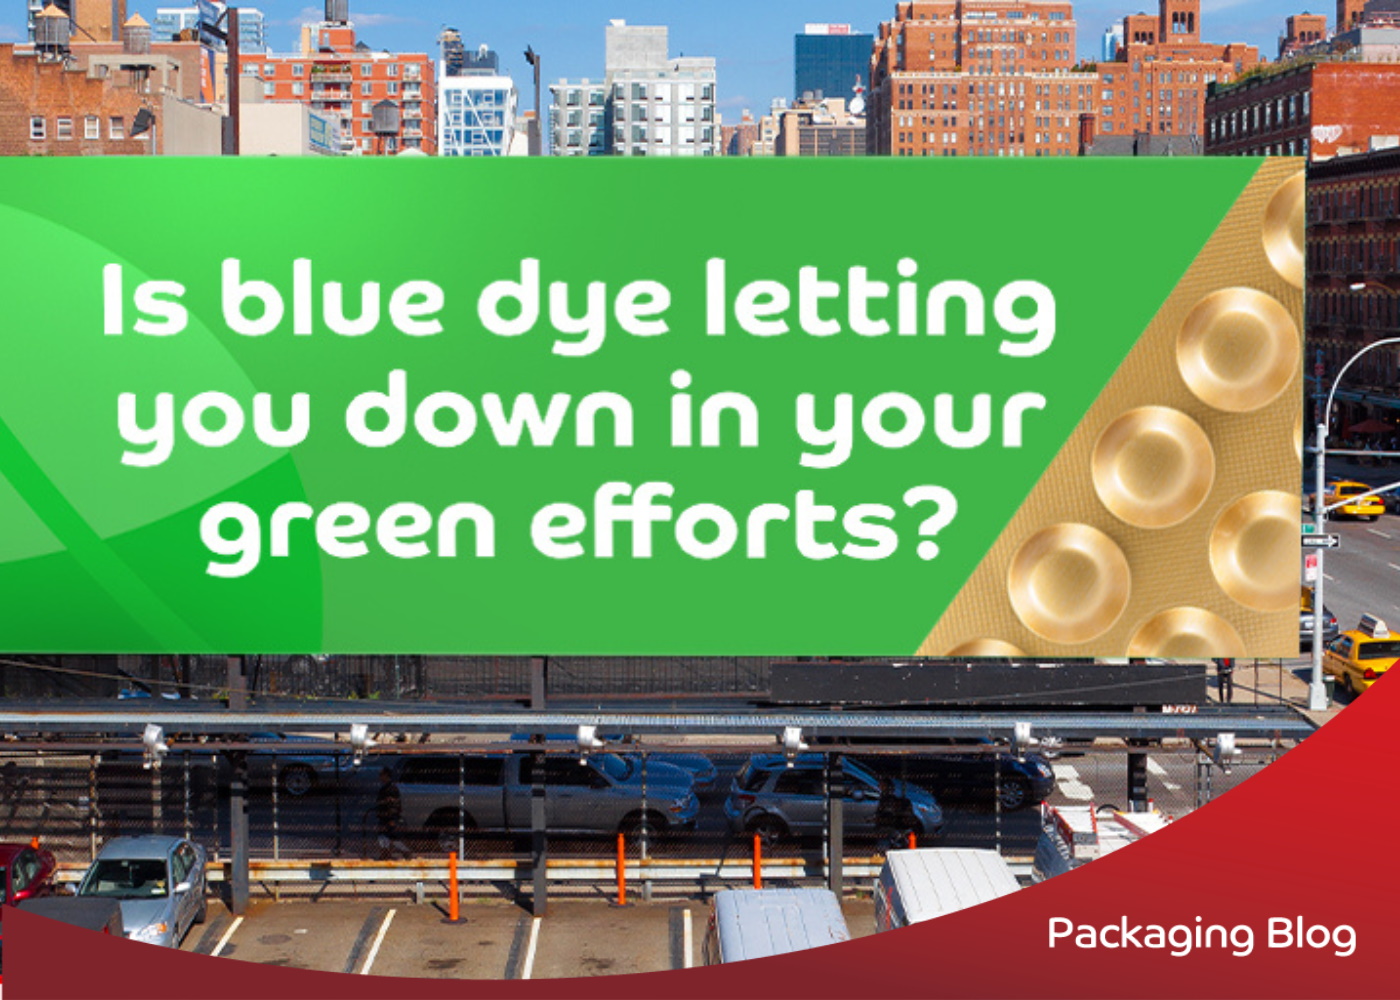 Is blue dye ingress testing letting you down in your green efforts?